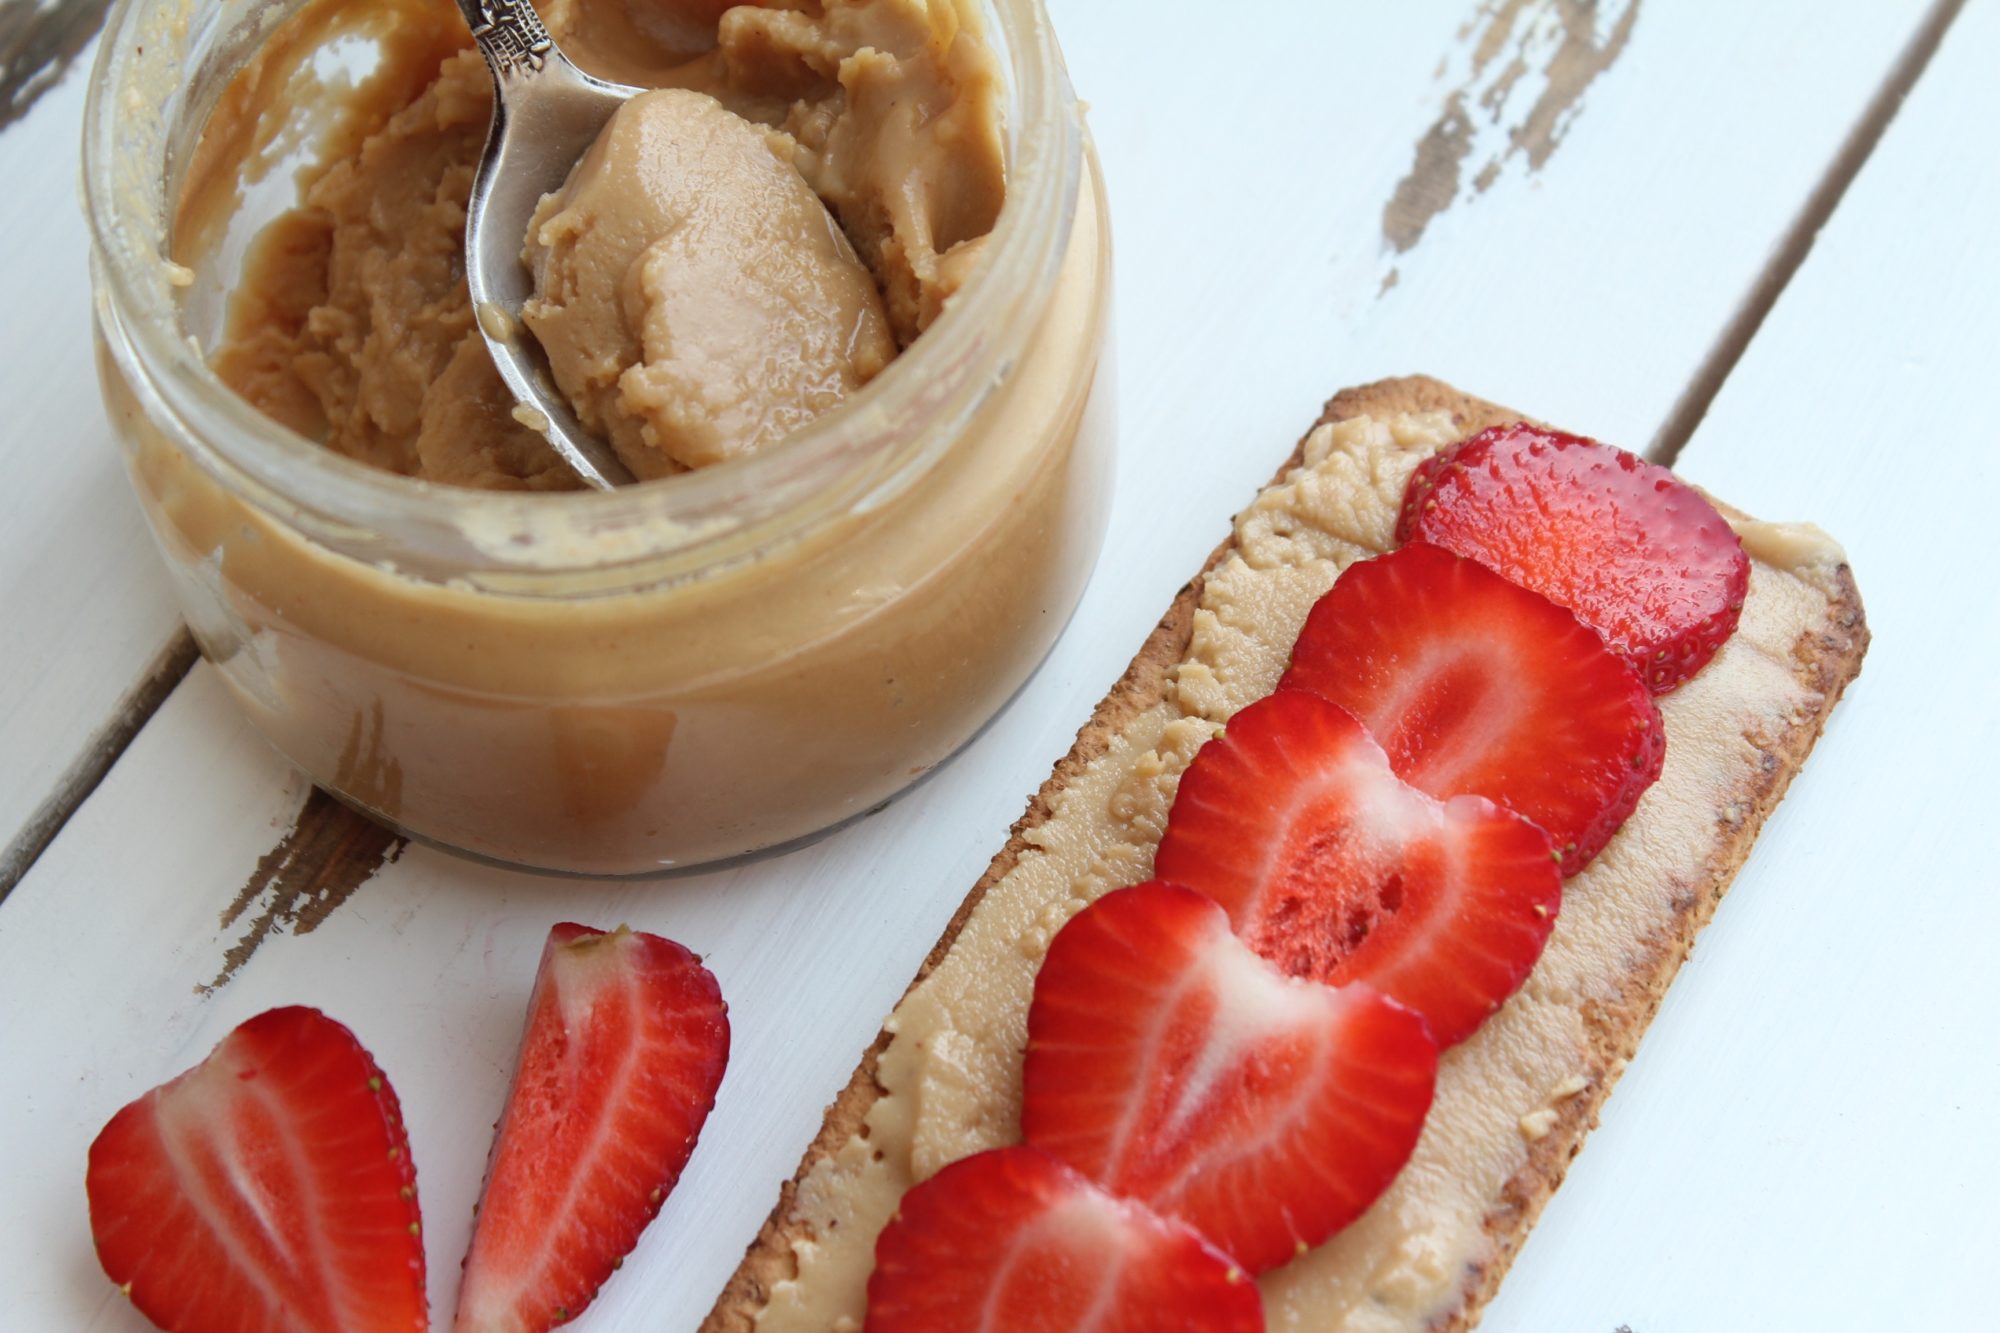 Peanut Butter Spread Is Not Going To Make You Fat